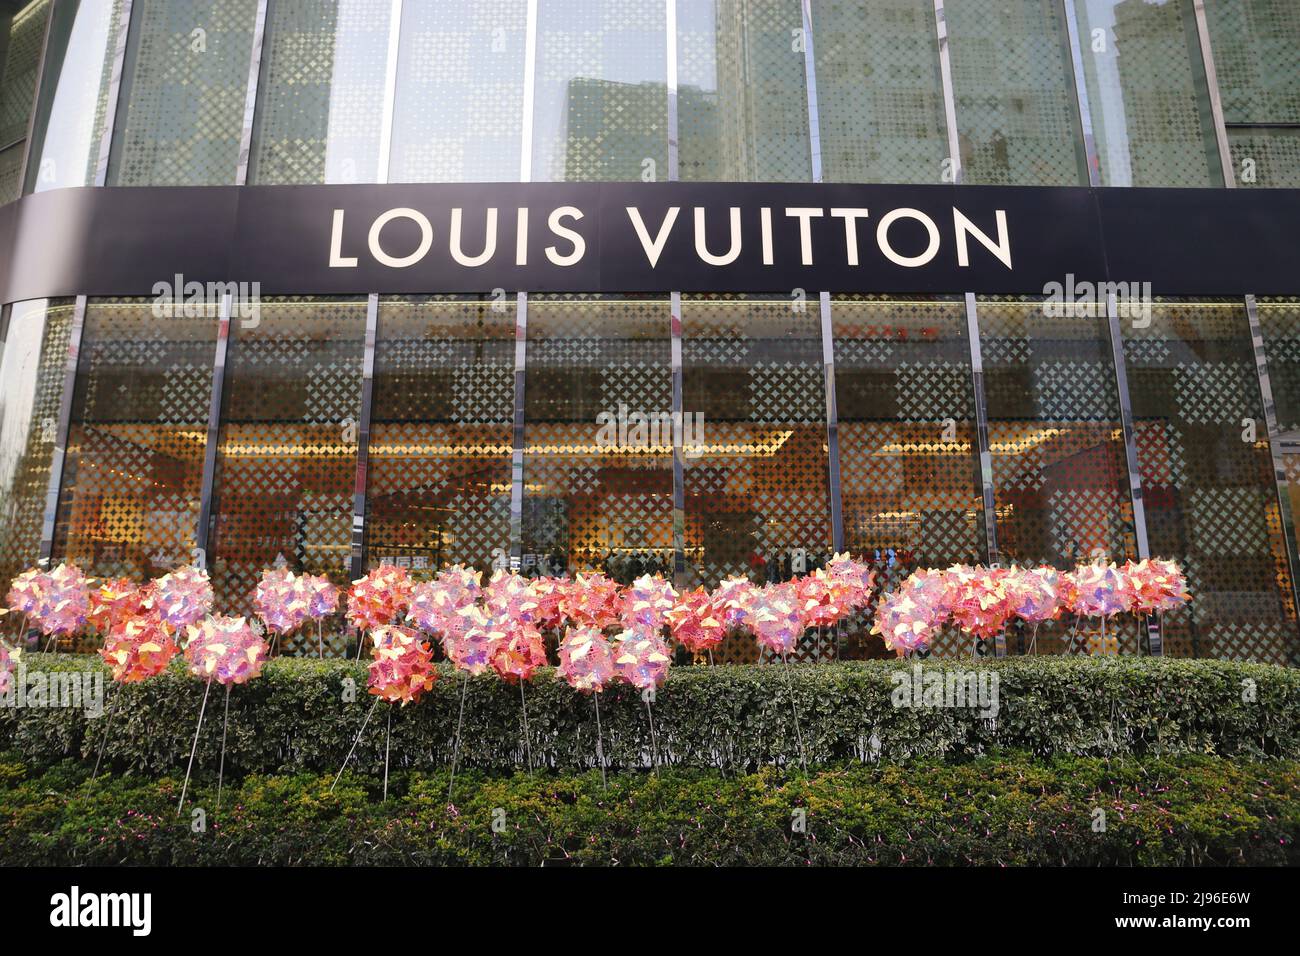 SHANGHAI, CHINA - JUNE 28, 2023 - People take photos of Louis Vuitton  coffee they just bought at the entrance of a Louis Vuitton cafe in Shanghai,  Chi Stock Photo - Alamy